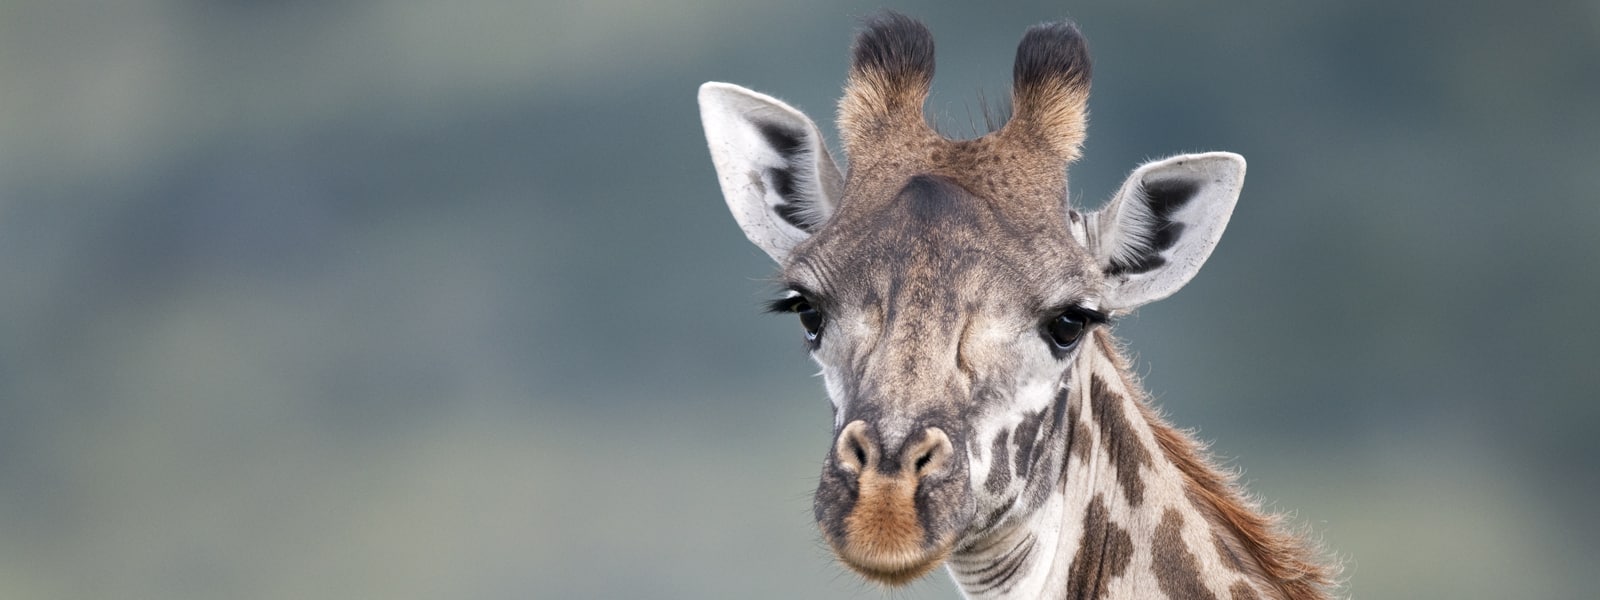 Genetic Analysis Uncovers Four Species of Giraffe, Not Just One